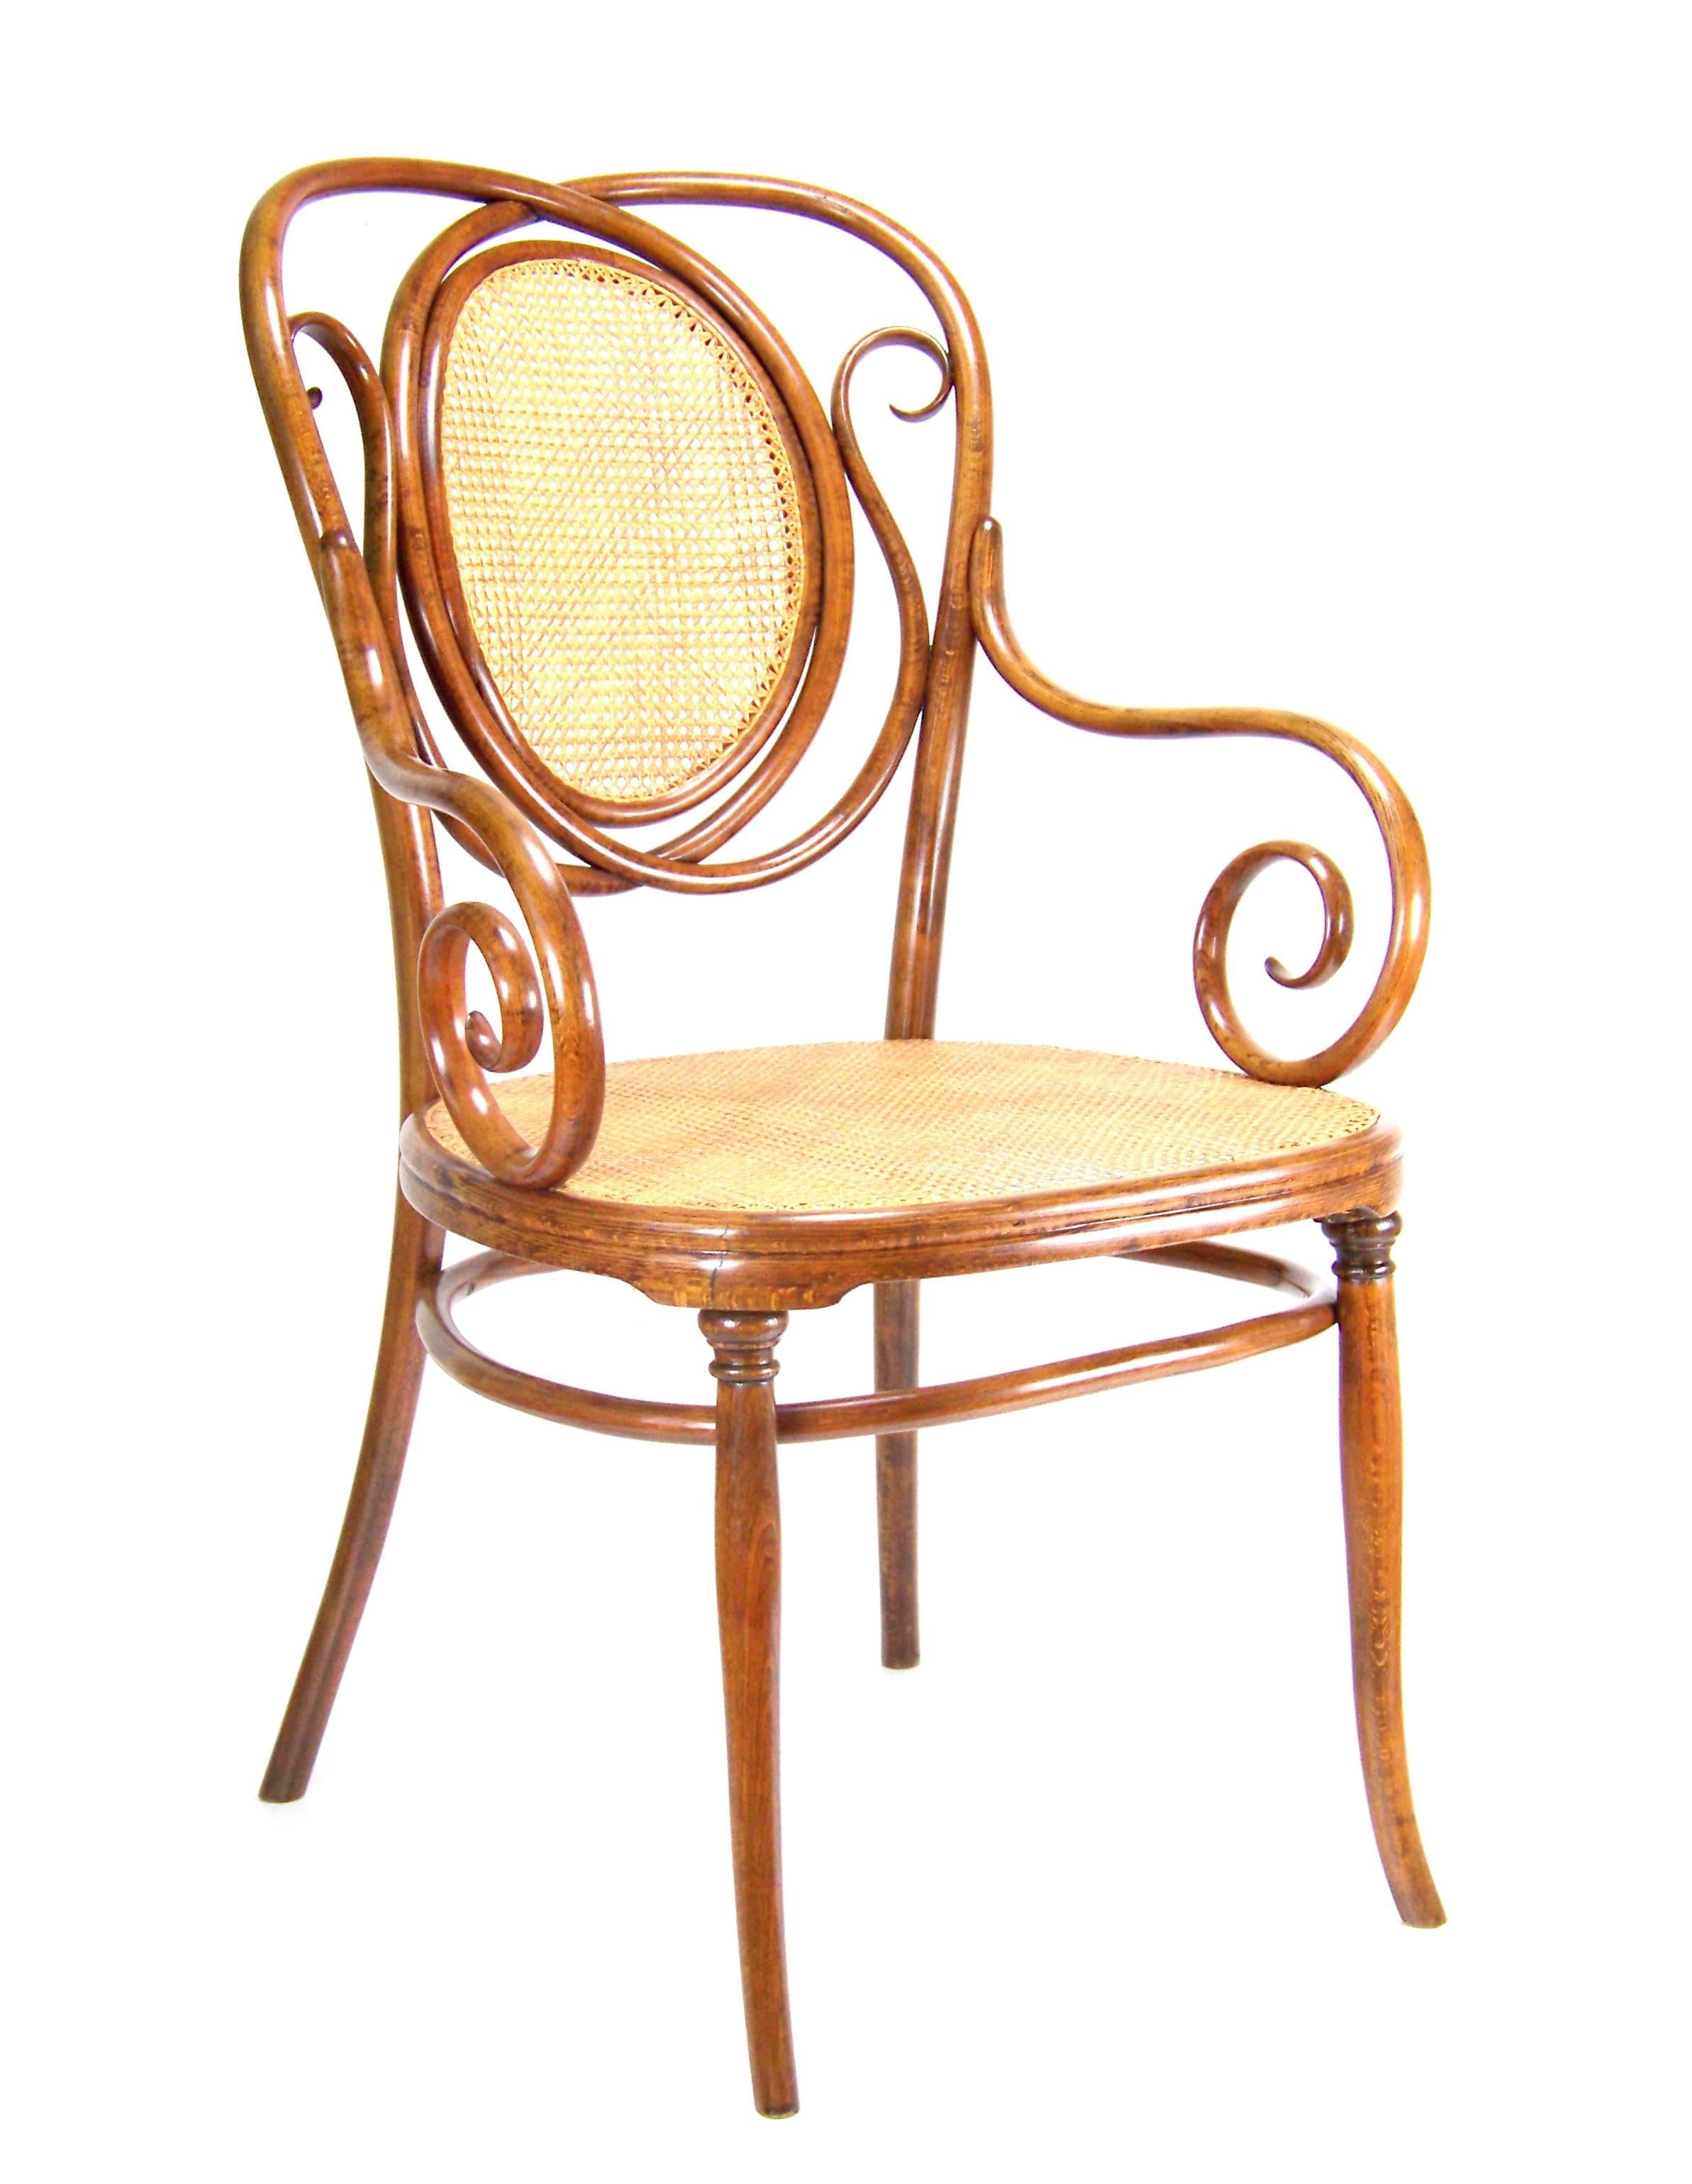 A very rare model, produced only in limited quantities. Collector's piece. Manufactured in Austria by the Gebrüder Thonet Company. In the production program was included, circa 1873. Marked with stamp, which is used circa 1887-1910. Newly restored.